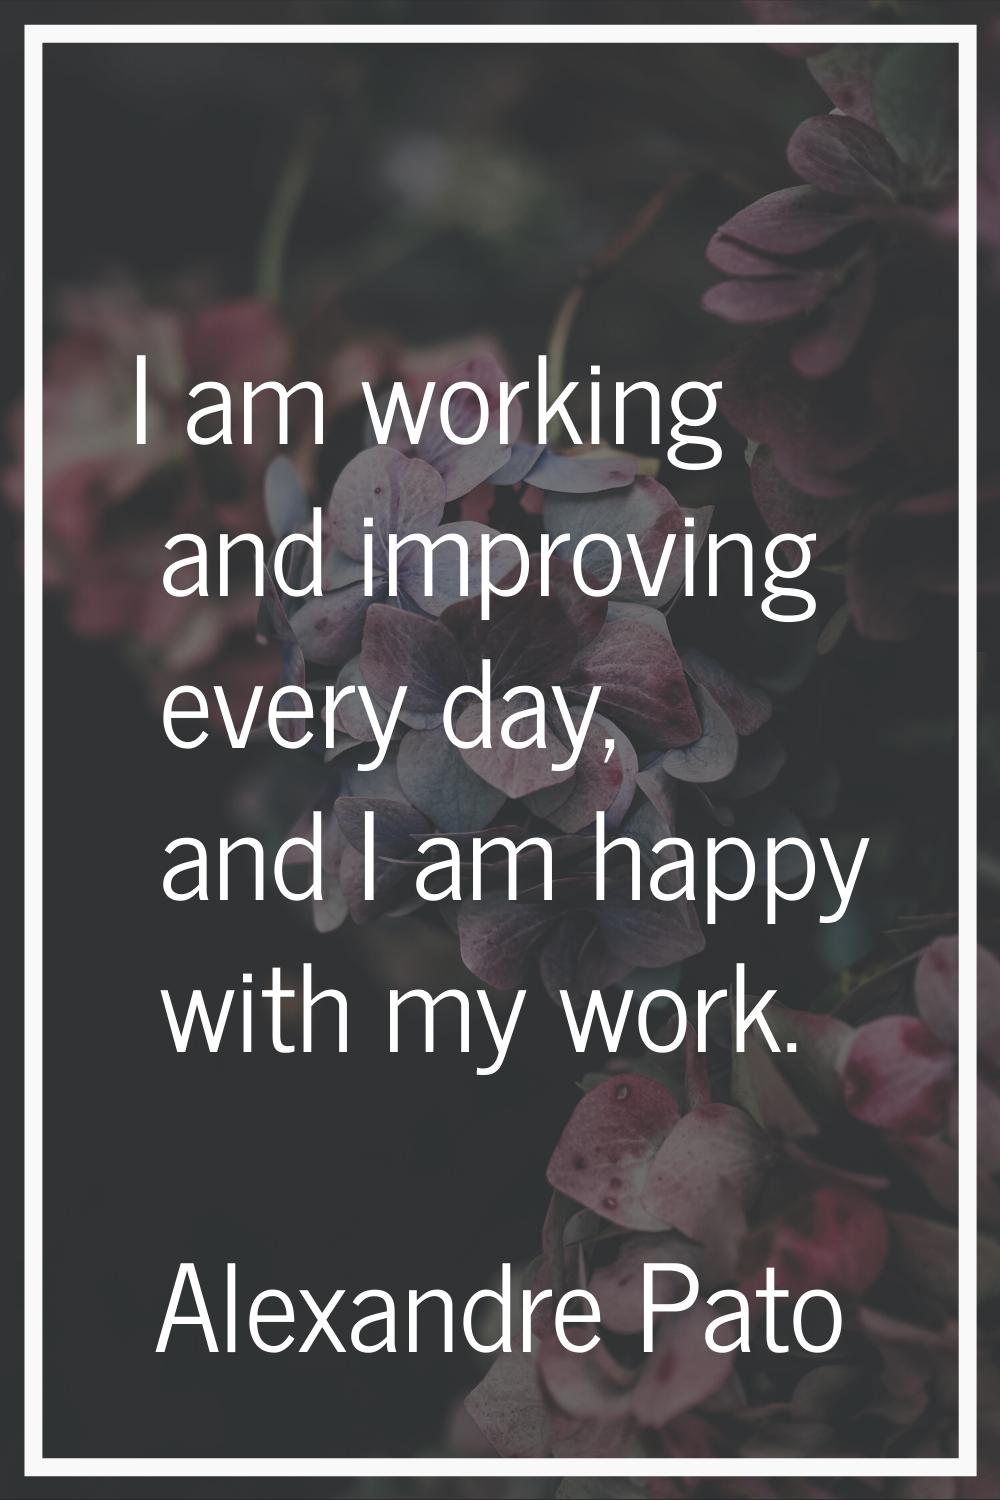 I am working and improving every day, and I am happy with my work.